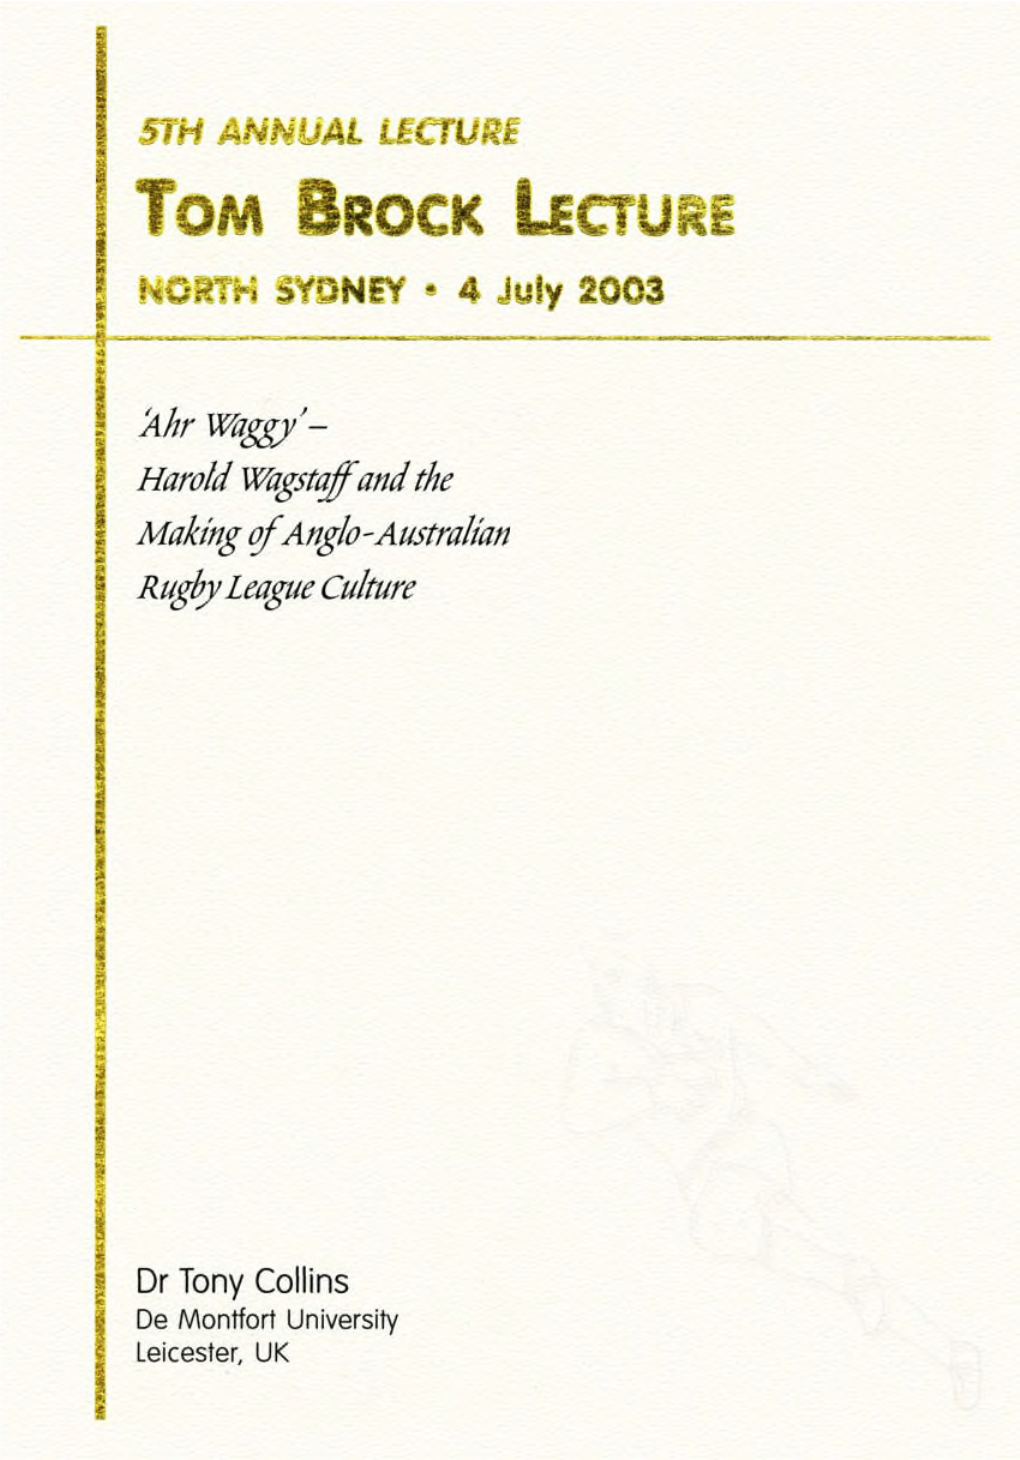 Ahr 'Waggy' Harold Wagstaff and the Making of the Anglo-Australian